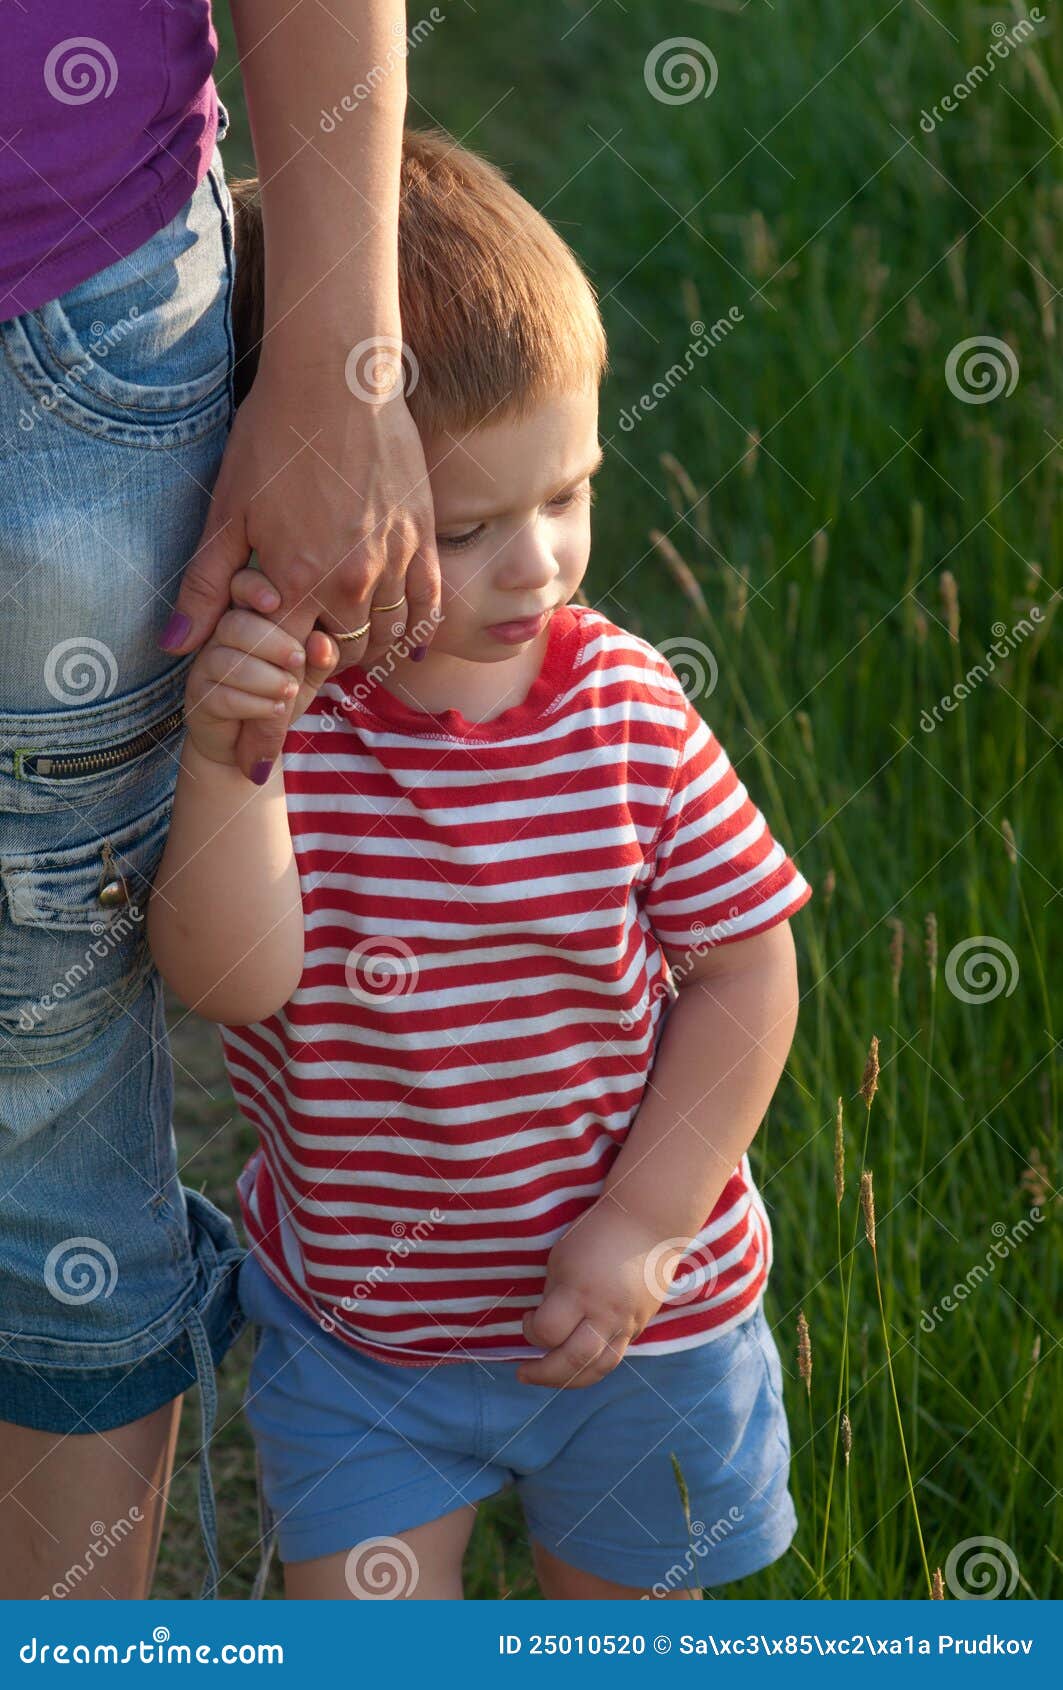 Cute Little Boy Holding Hand of His Mother Stock Photo - Image of ...